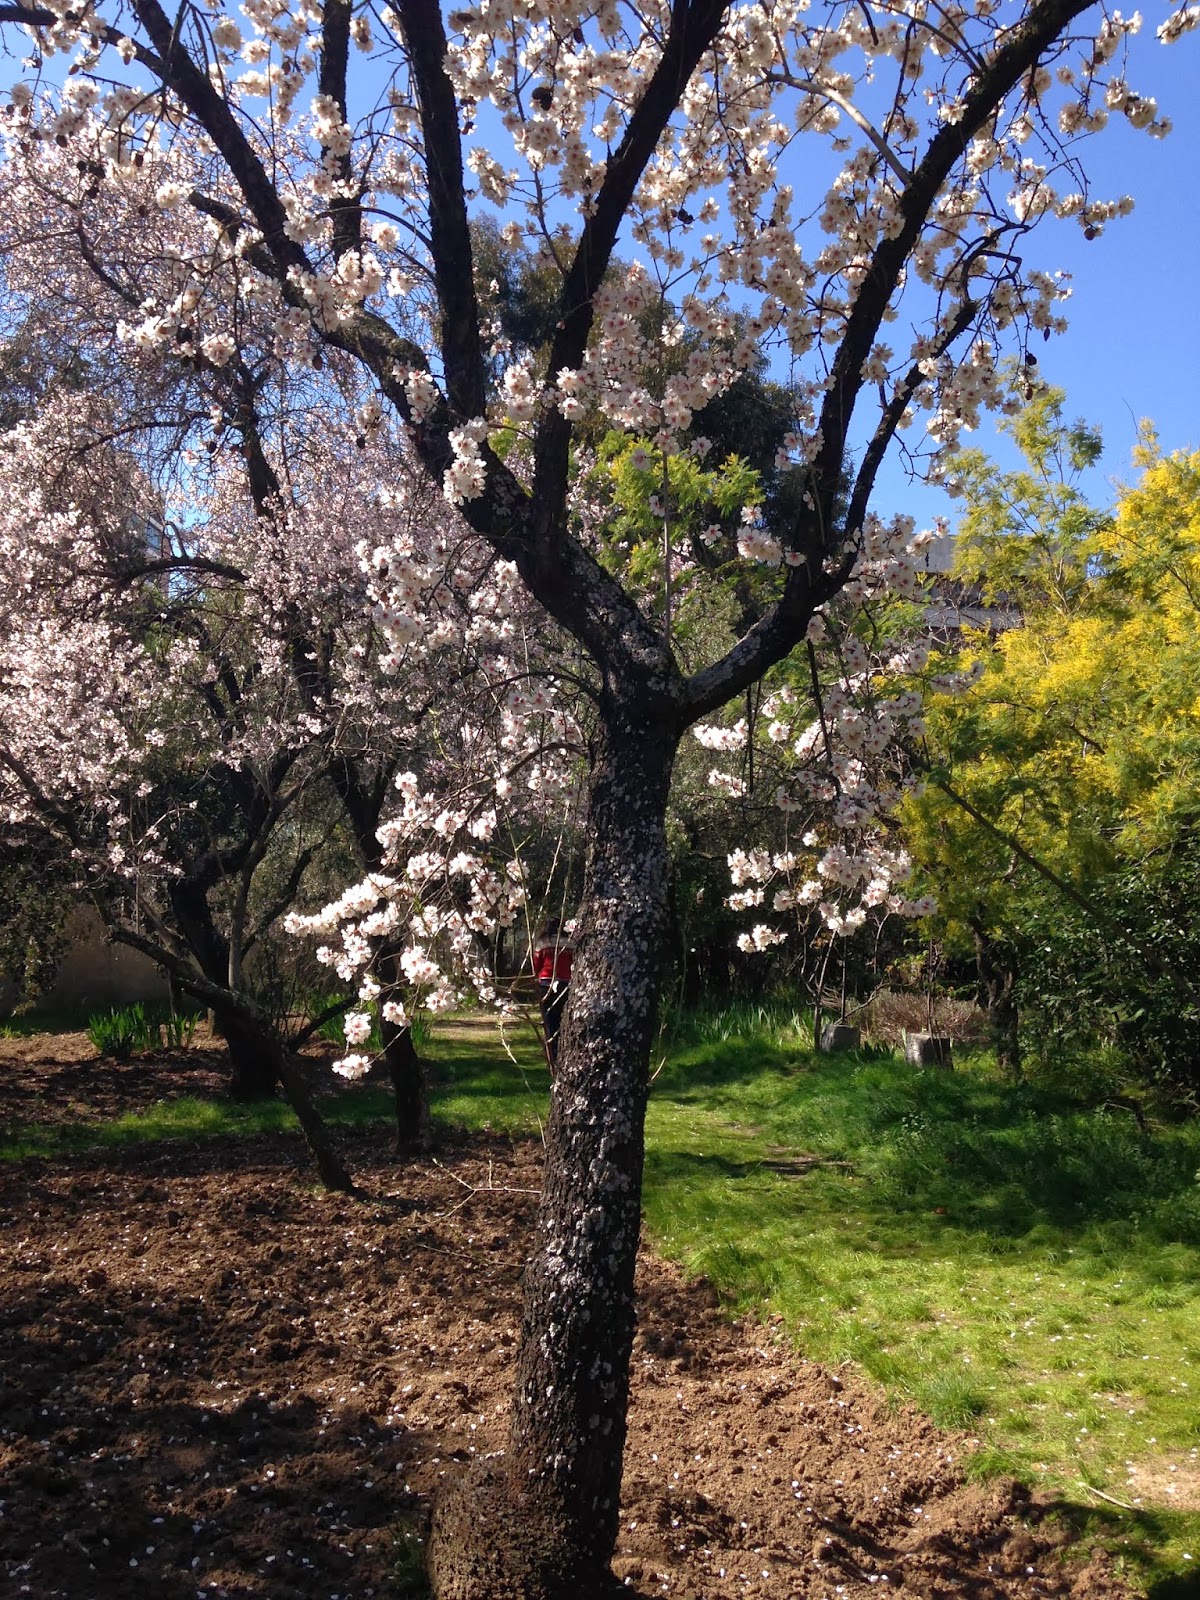 There are also Almond trees!